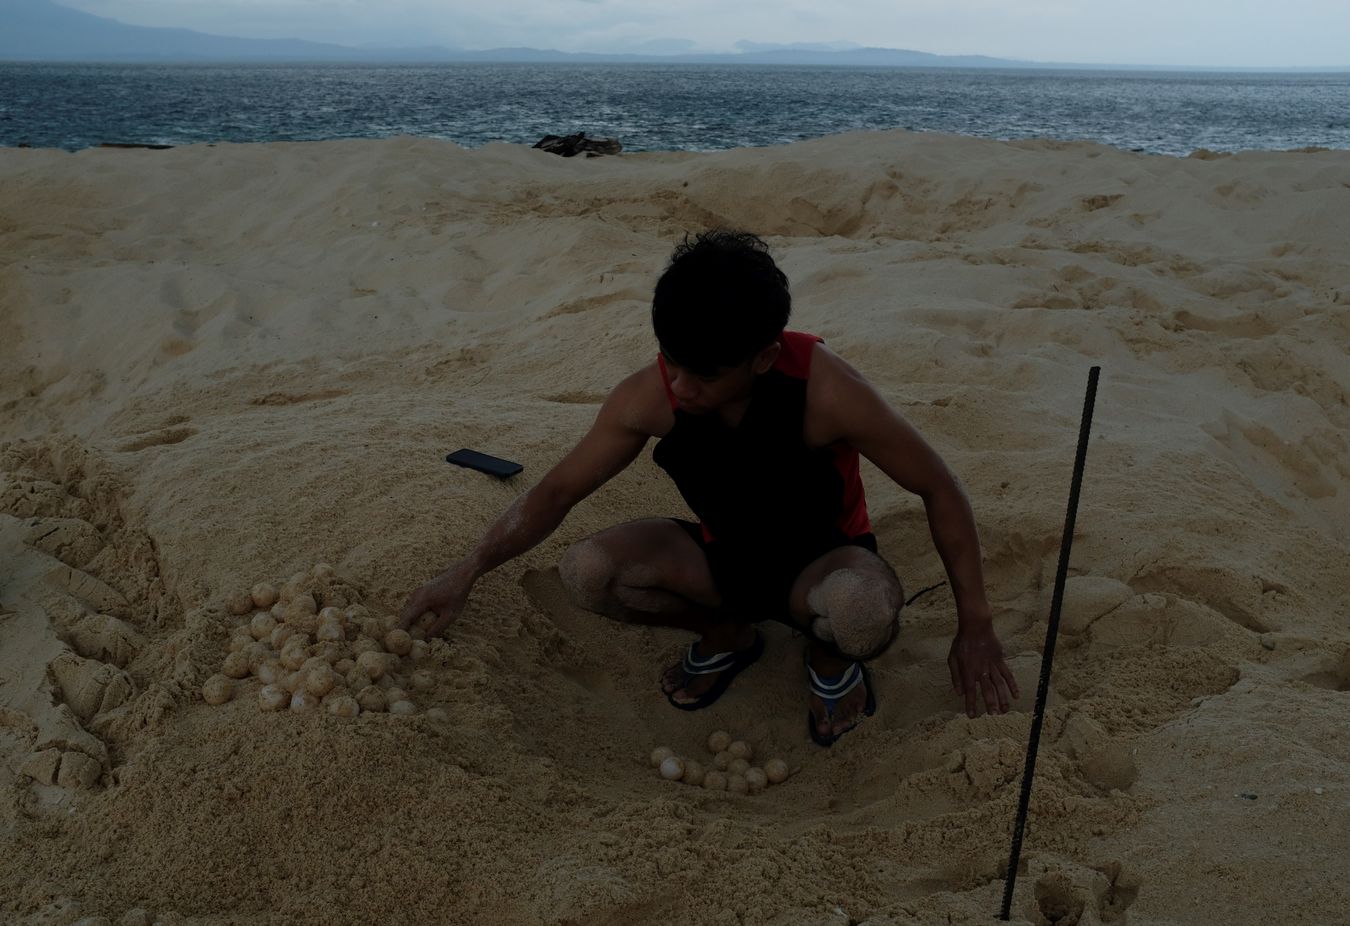 Early in the morning, Aidil, controller of the LPP, collects sea turtle eggs to transport them to the hatchery.